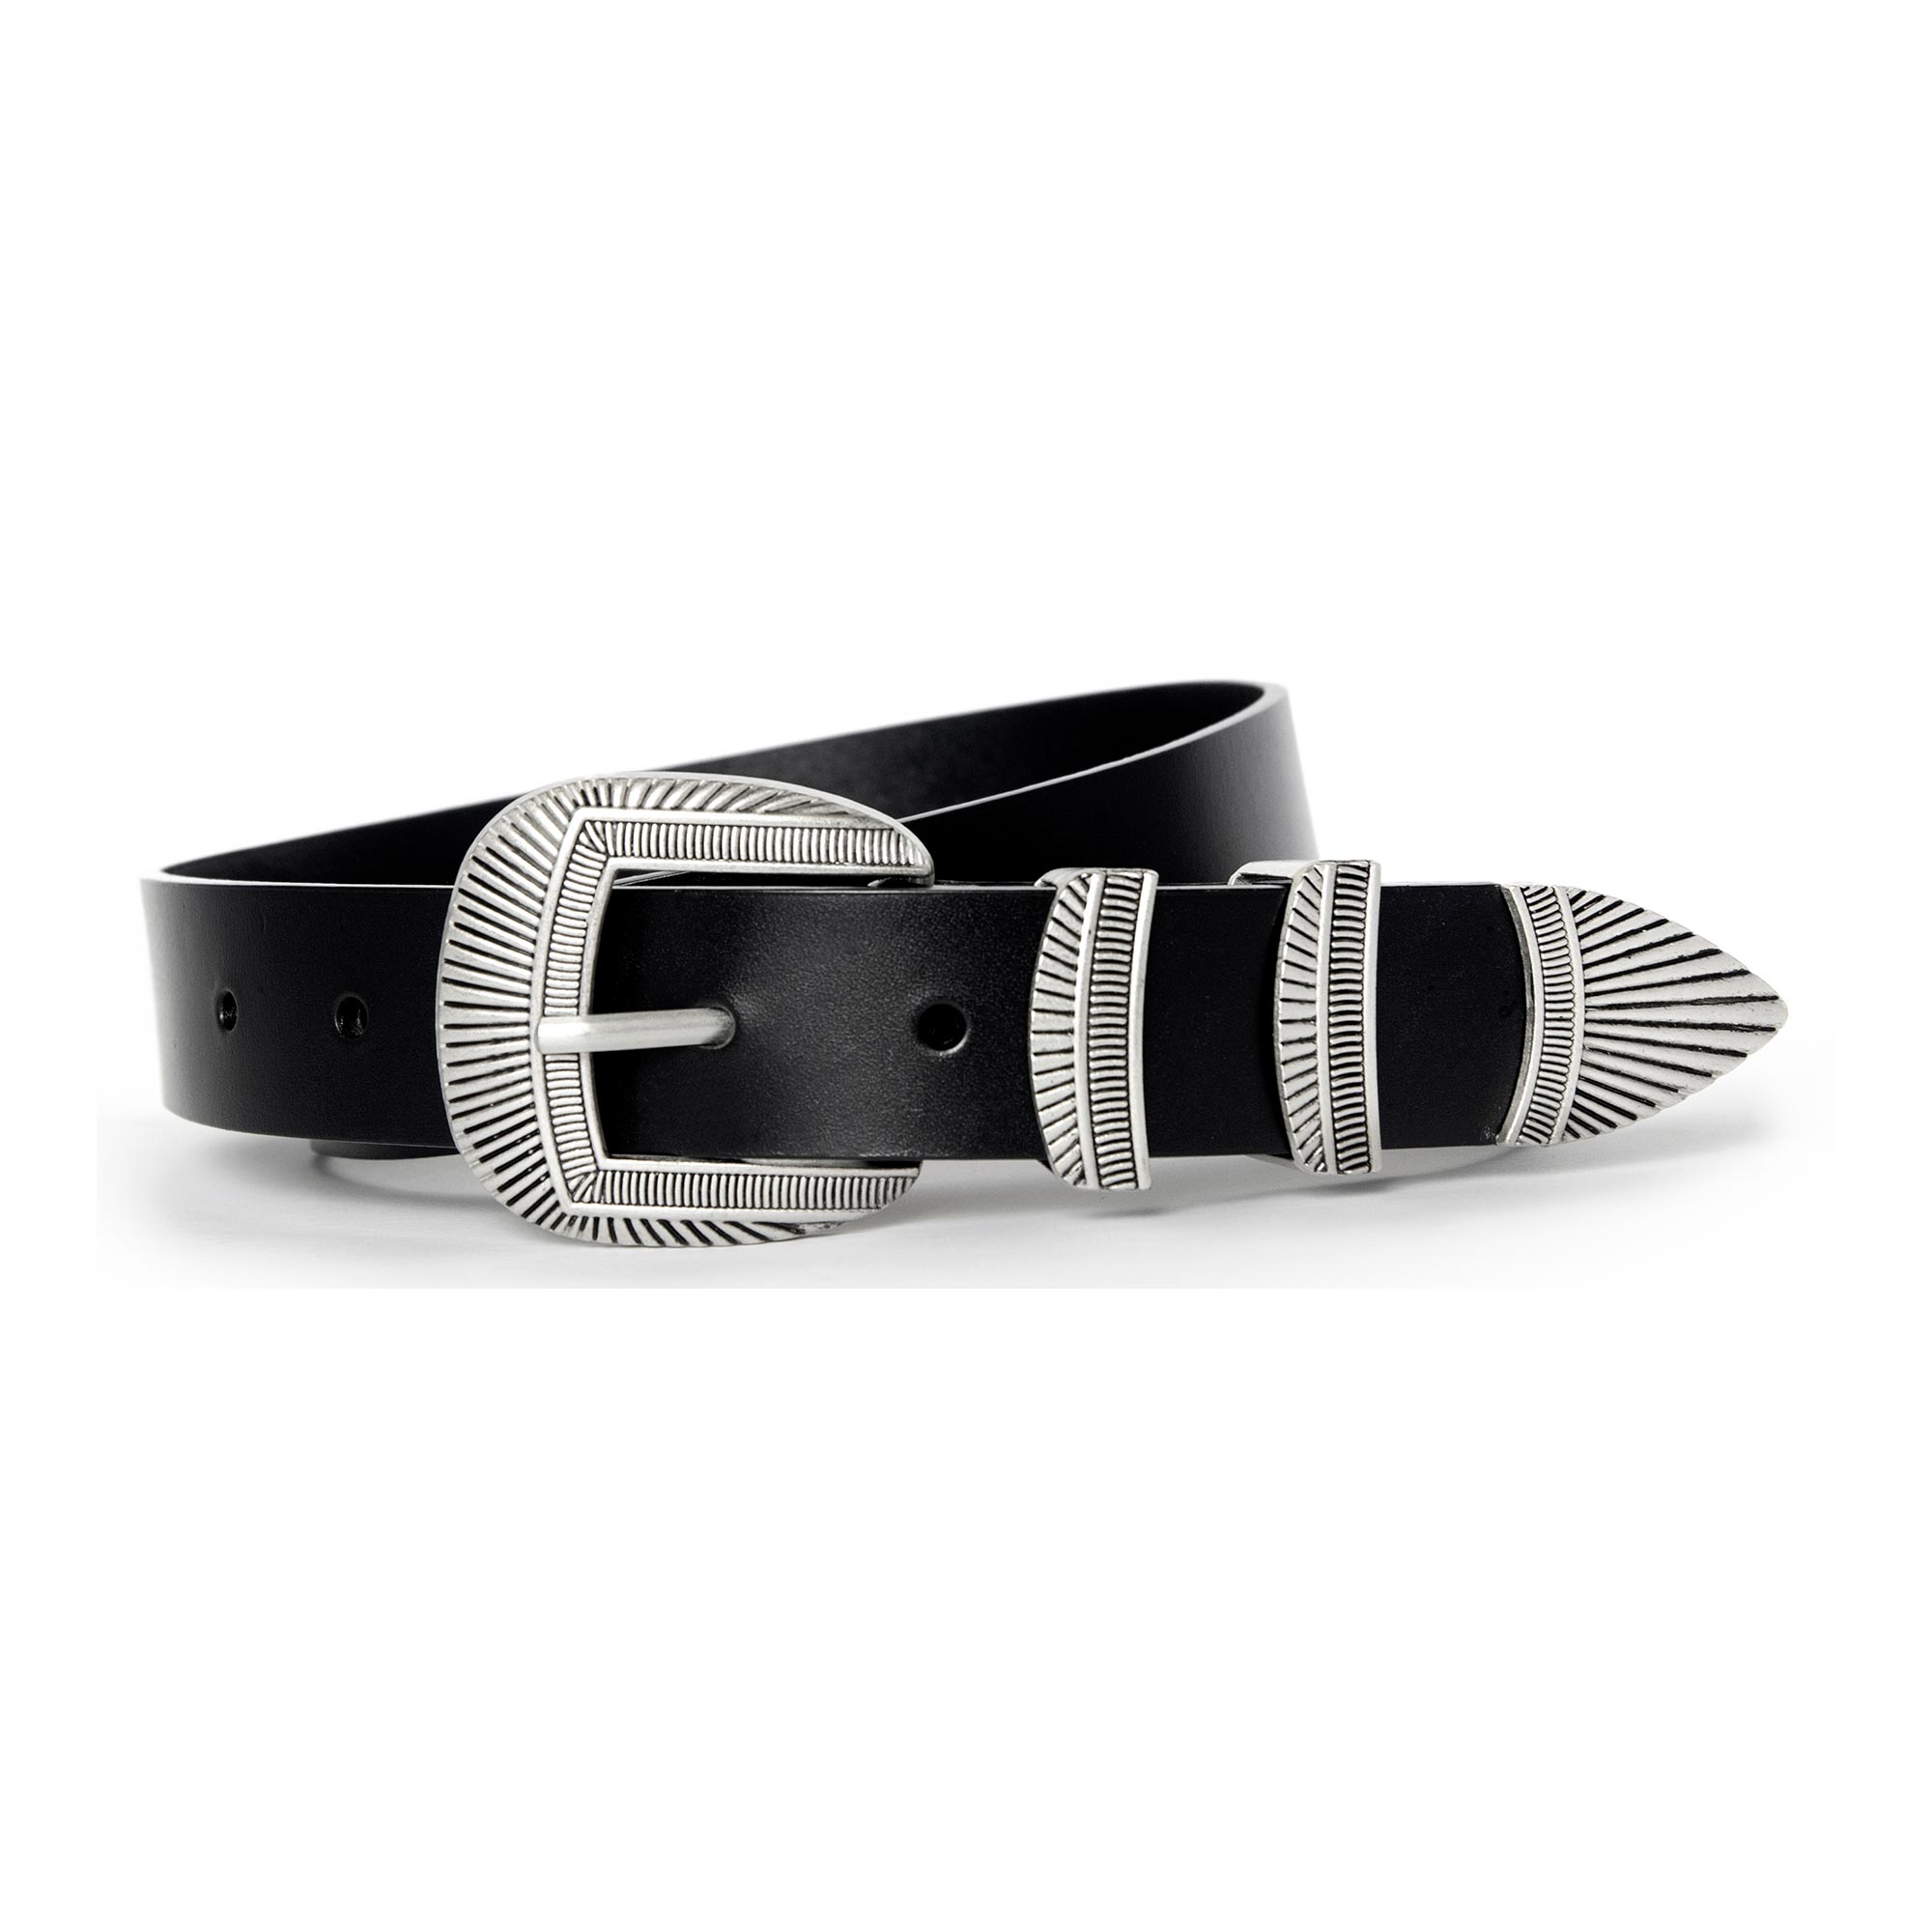 Dutch - Leather Belt - Men's by Straight to Hell